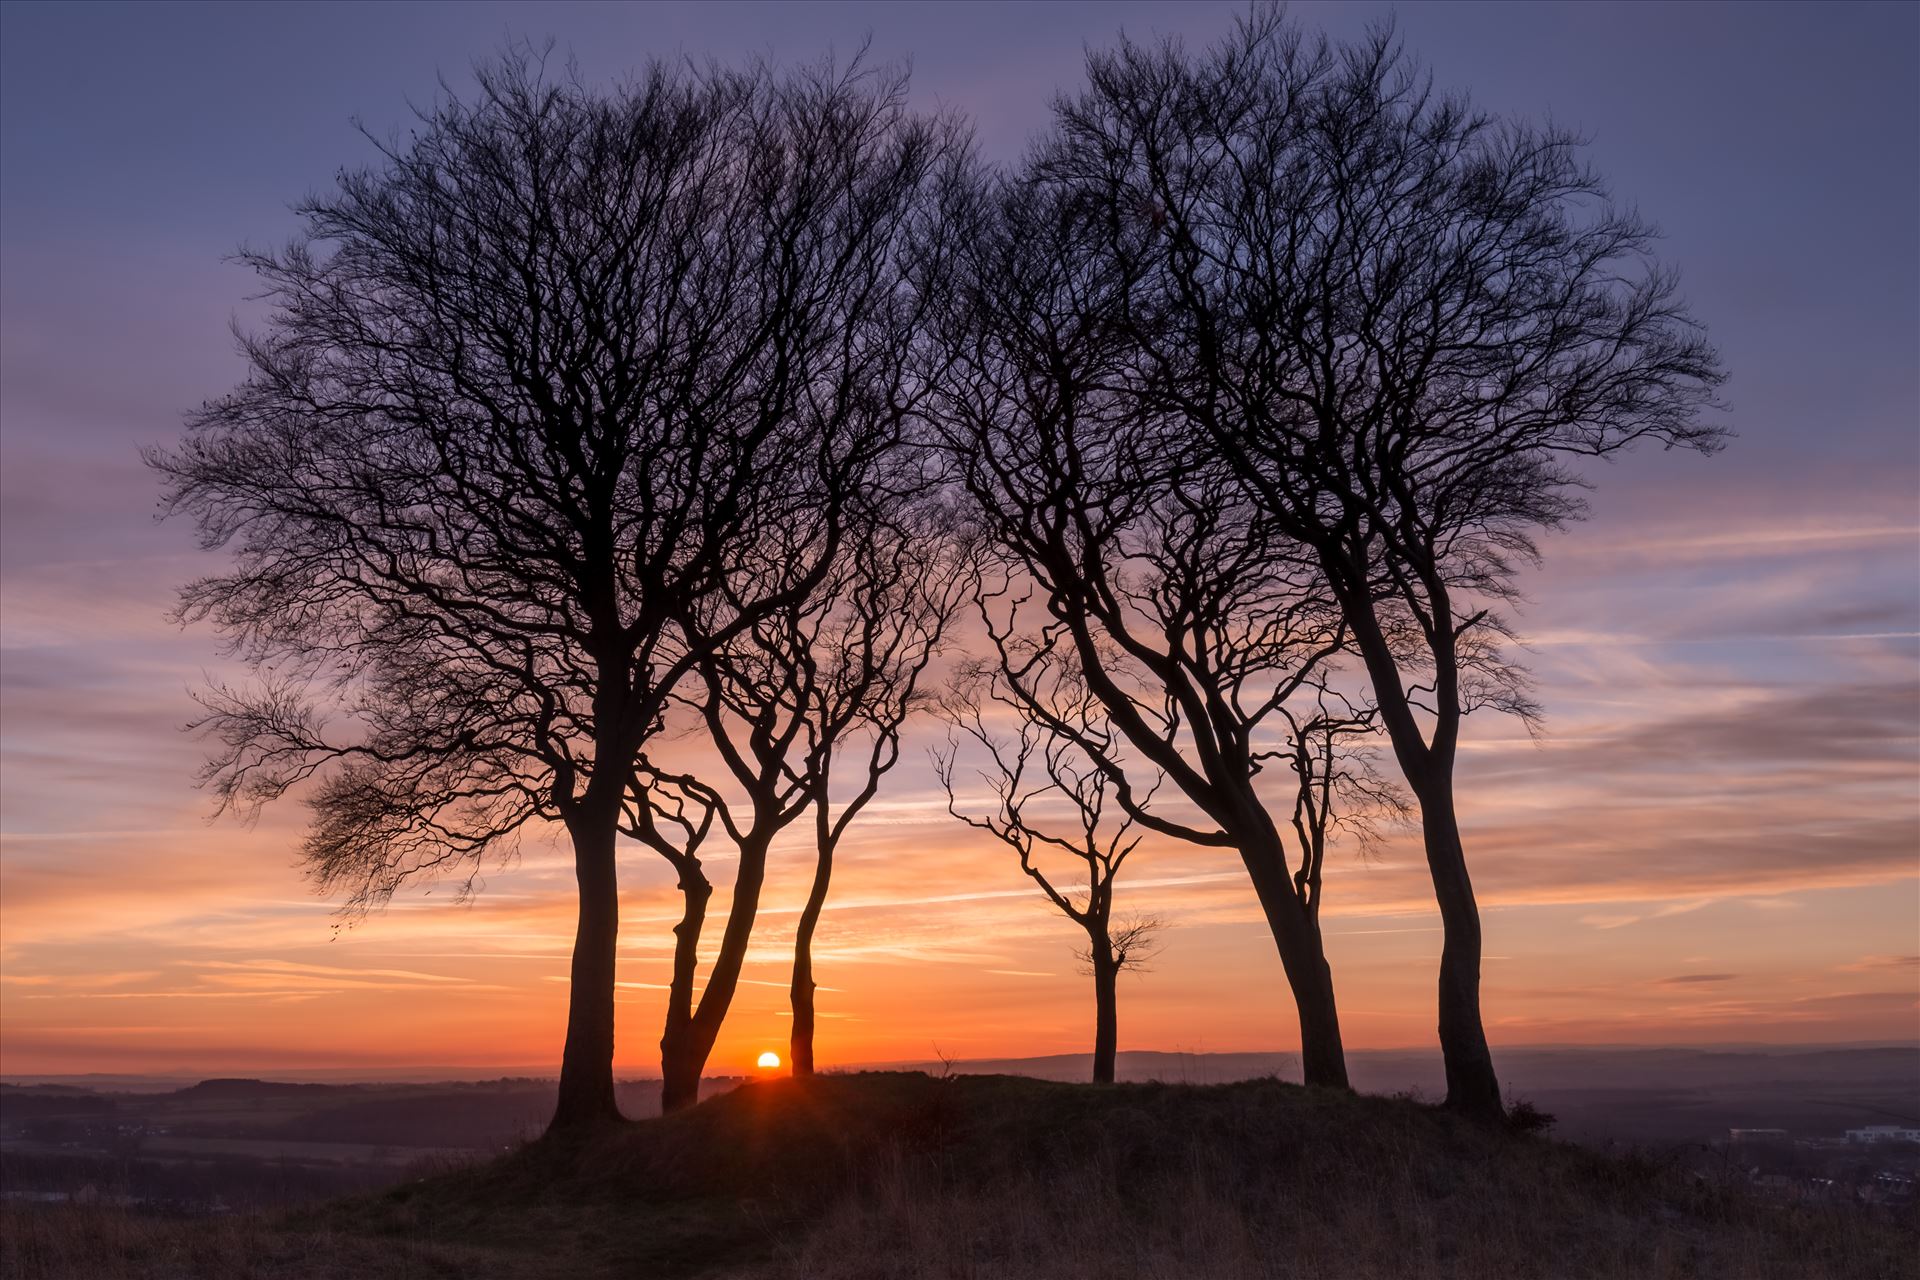 Sunset at Copt Hill Copt Hill is an ancient burial ground near Houghton-le-Spring. The site is marked by six trees. Presumably there used to be a seventh tree, as they are known as the Seven Sisters. by philreay